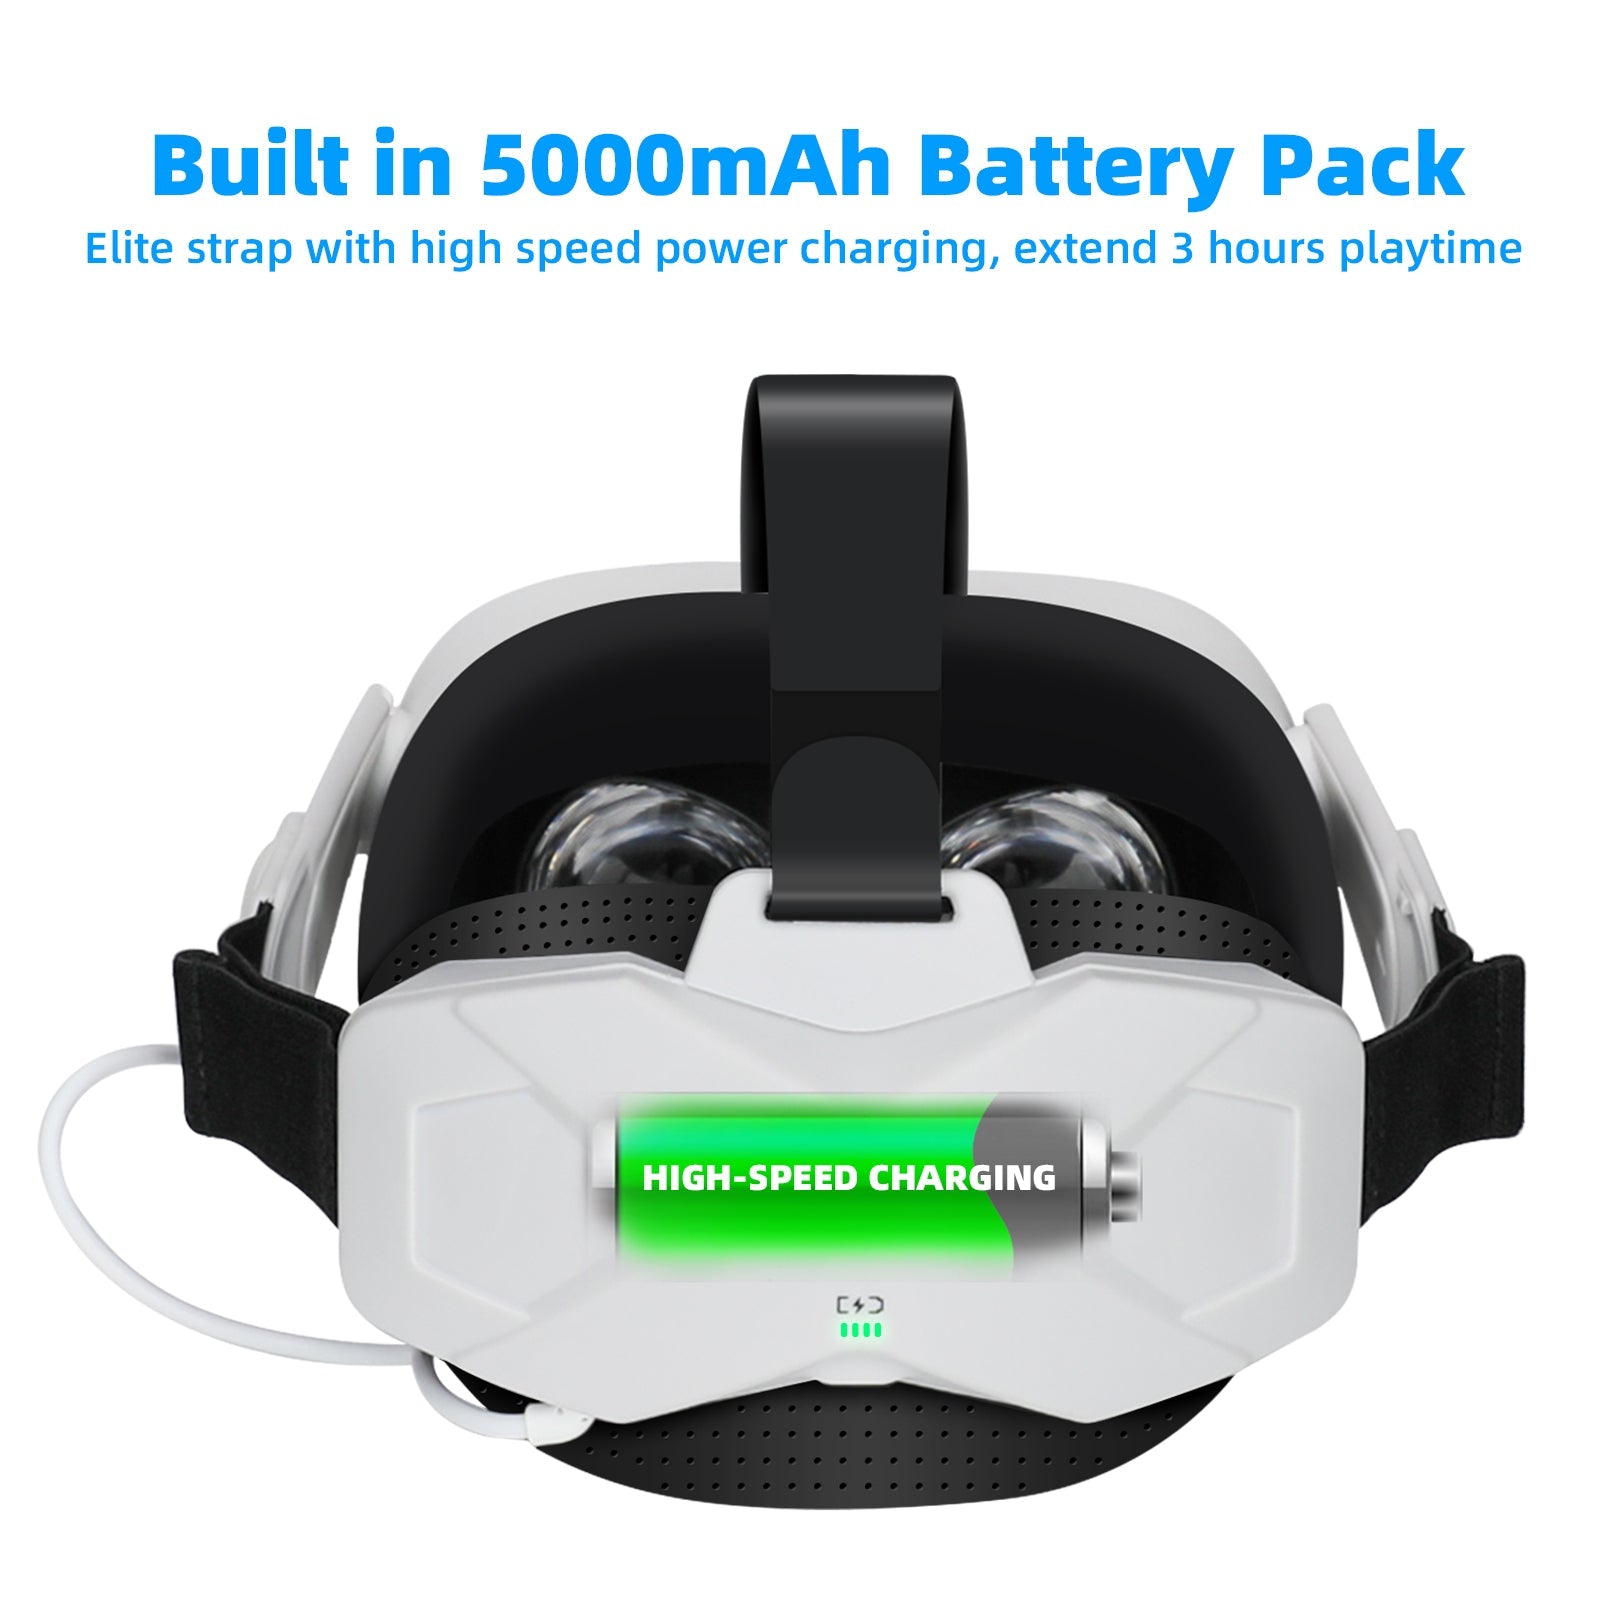 VR Power 2 with Battery Strap for Oculus Quest 2 Headset